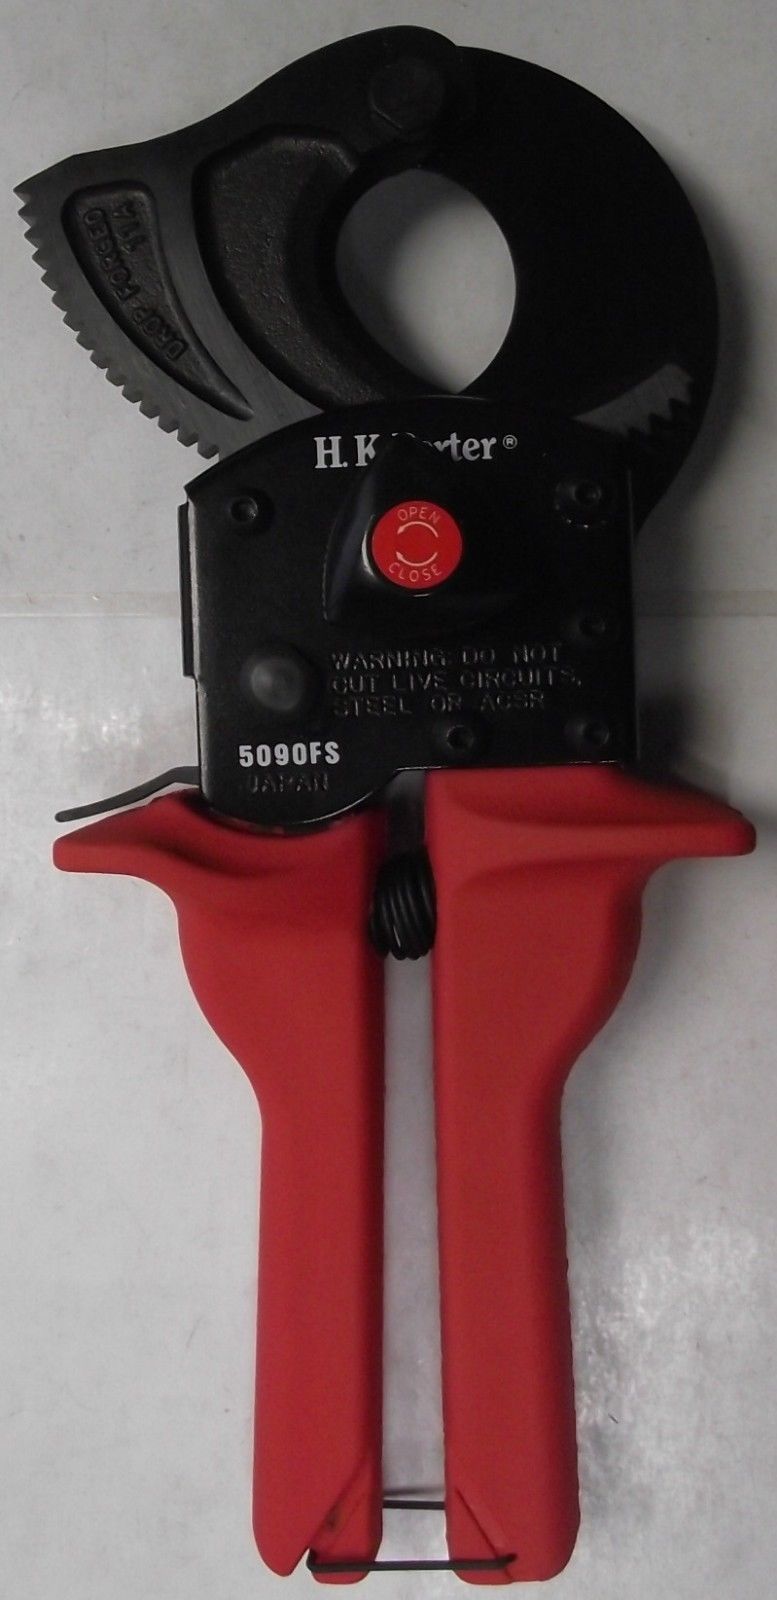 HK Porter 5090FS Ratchet-type One Hand Operated Soft Cable Cutter Japan